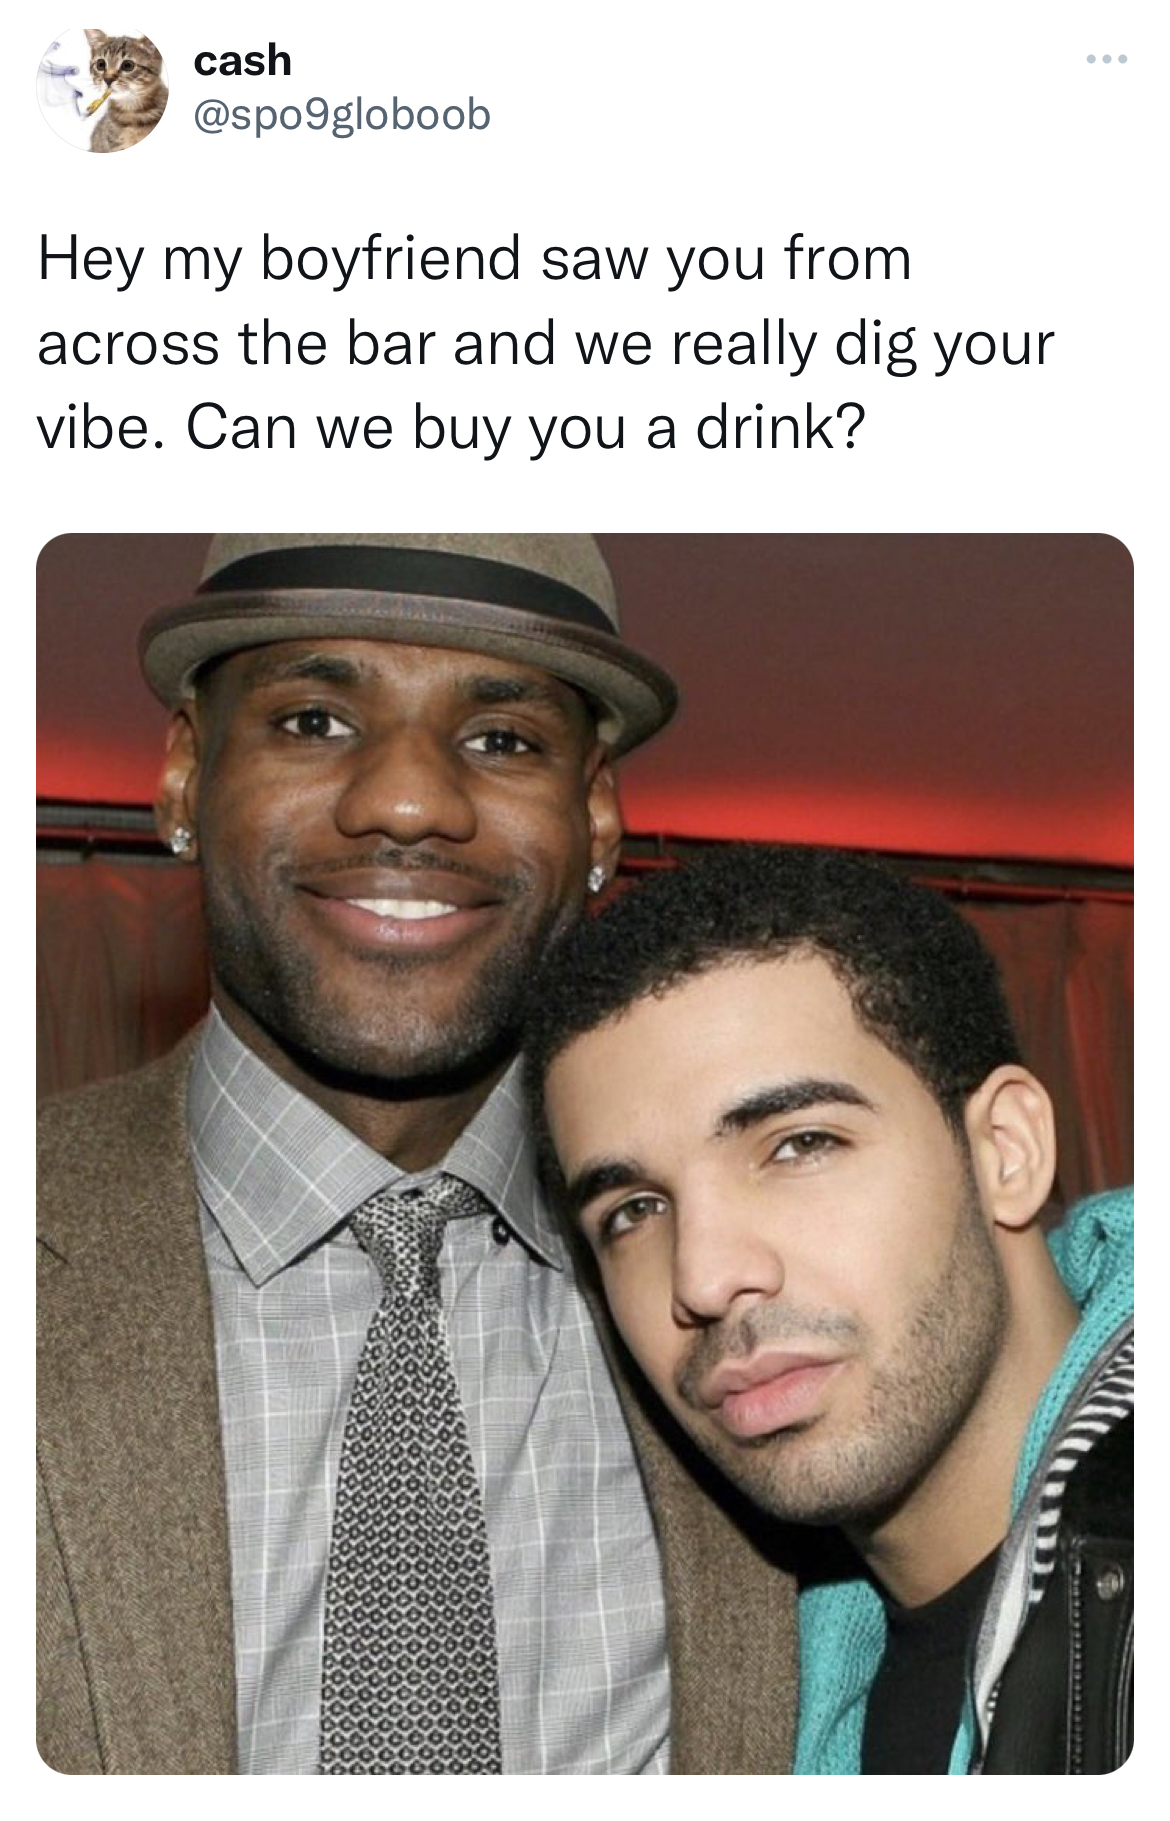 swinger memes across the bar - lebron and drake - cah Hey my boyfriend saw you from across the bar and we really dig your vibe. Can we buy you a drink?